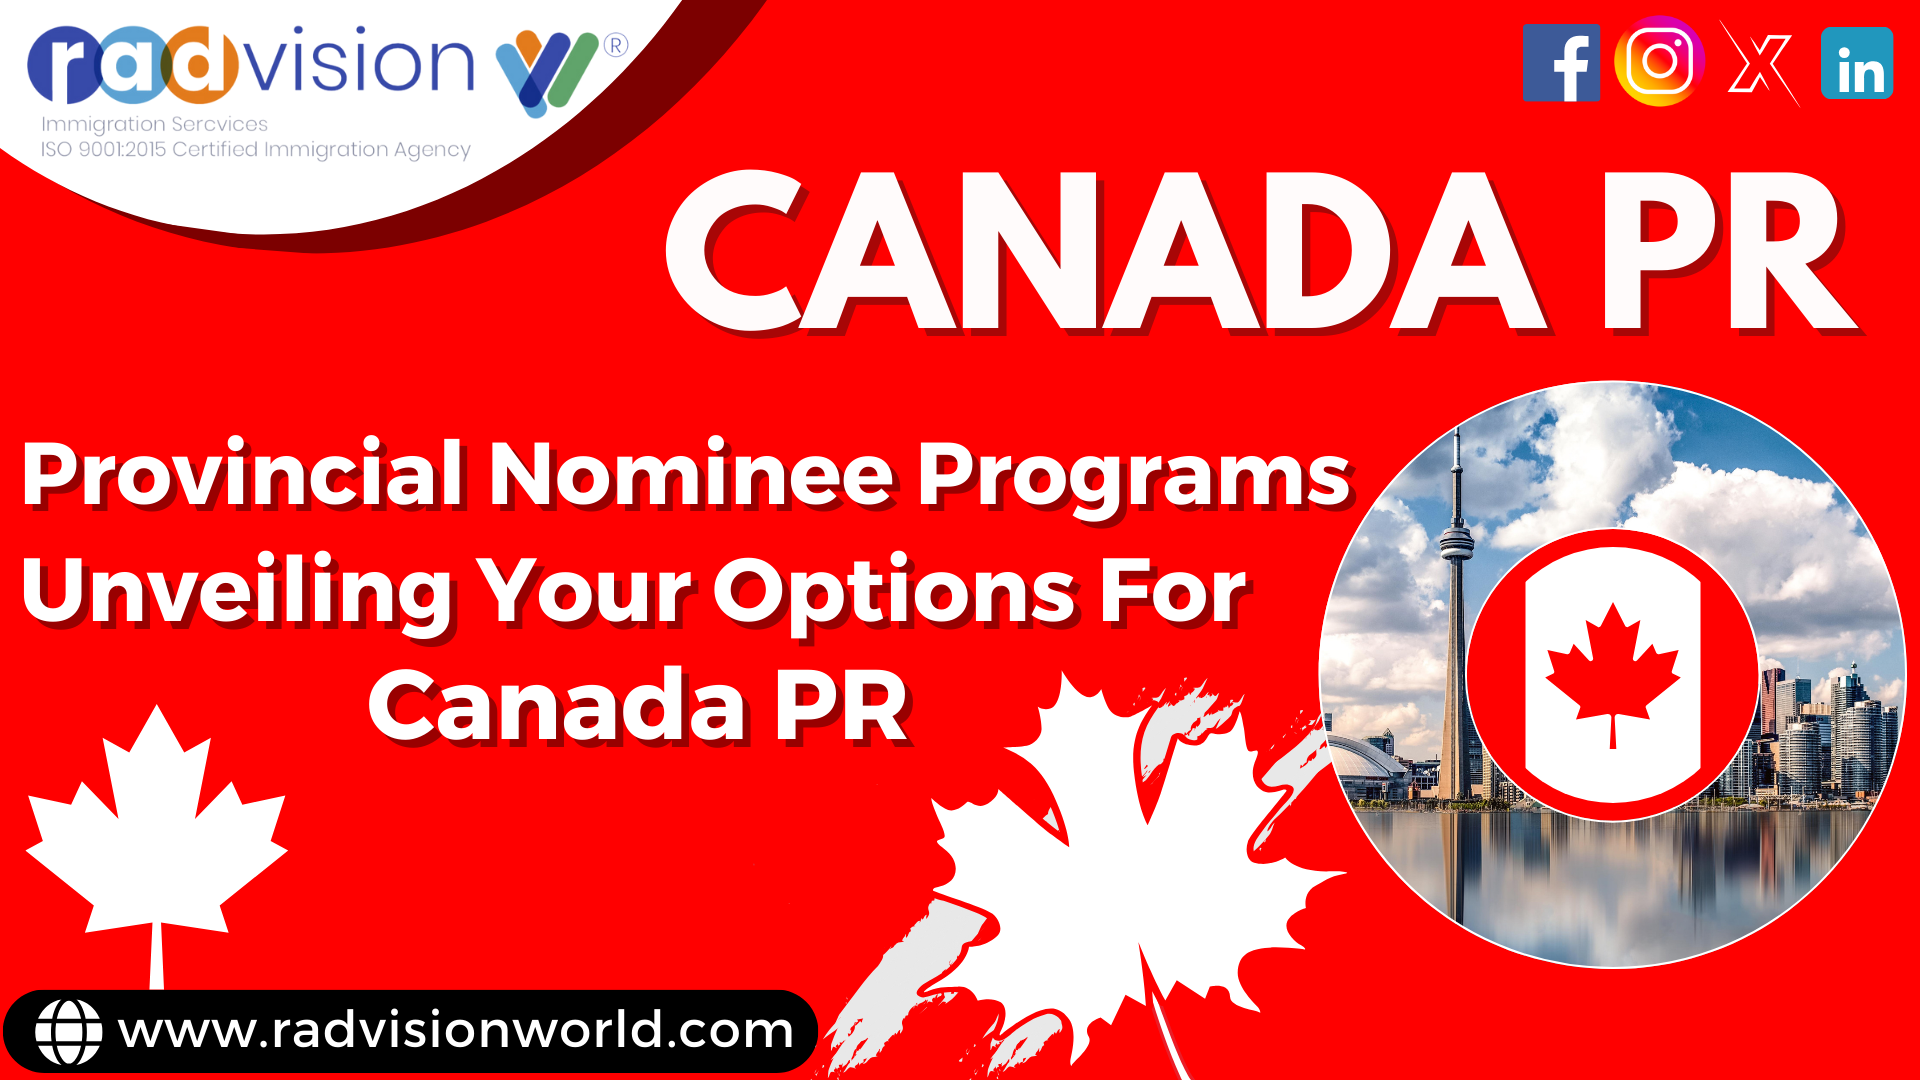 Provincial Nominee Programs Unveiling Your Options For Canada PR